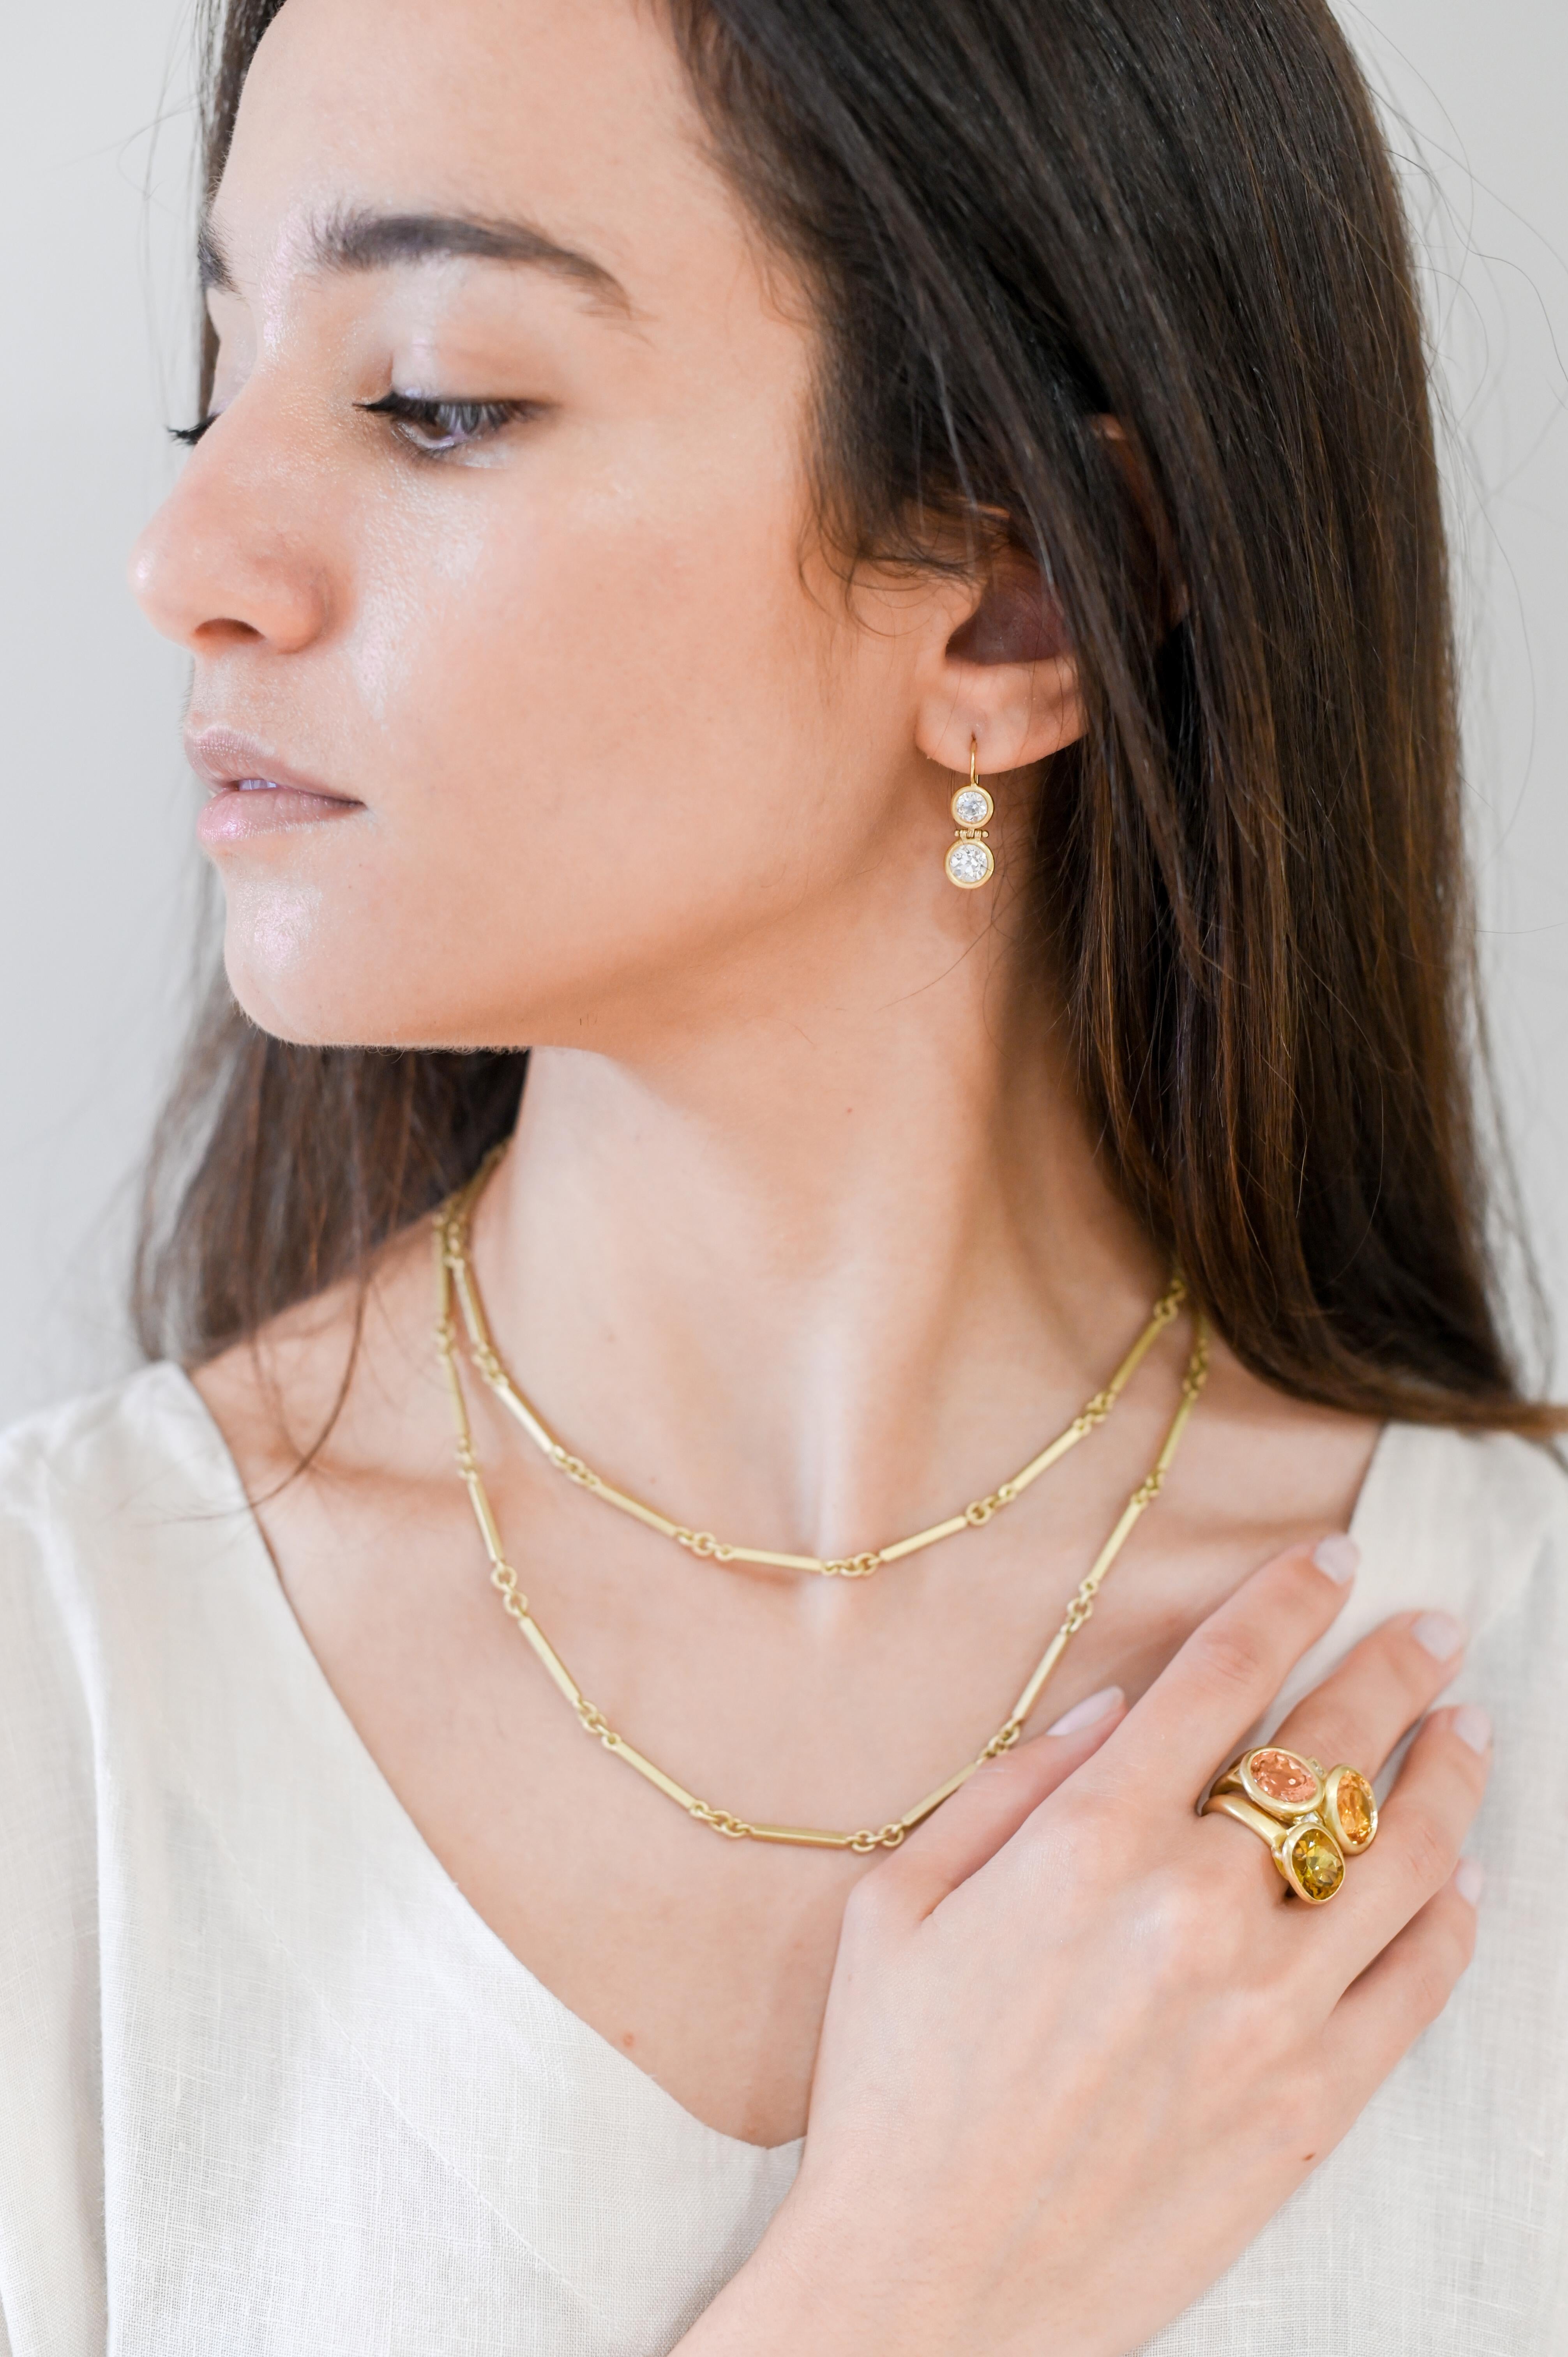 Handcrafted in solid 18k gold, Faye Kim's version of a Fob chain is refreshingly modern and fresh.
Designed to be worn long, or doubled, the total length is 34